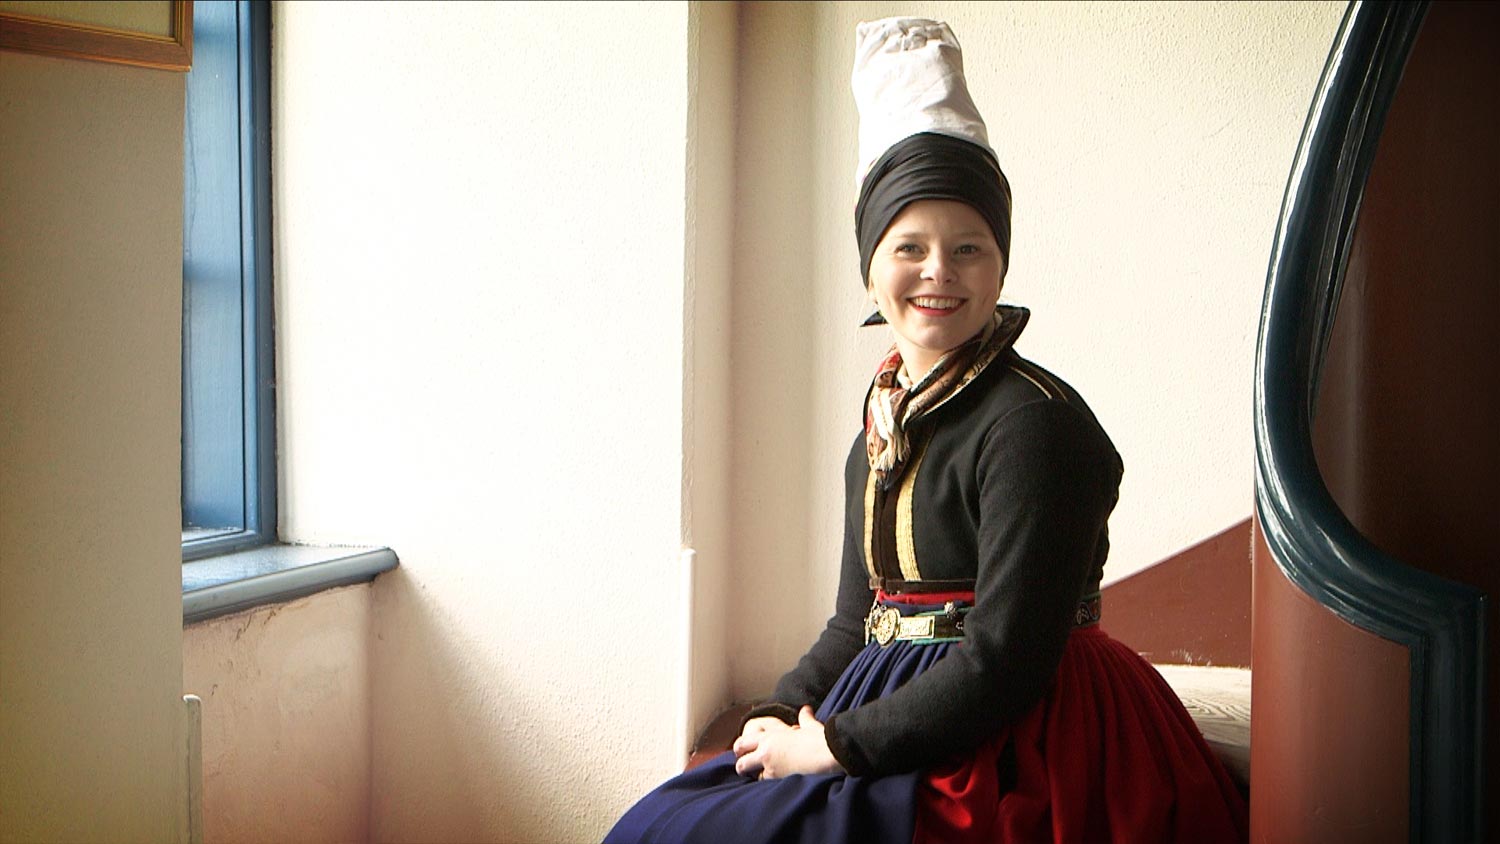 A young woman sitting on stairs in front of a window smiling in the direction of the camera. She is dressed in a red skirt, blue apron, and dark jacket and wears a high, white headdress.